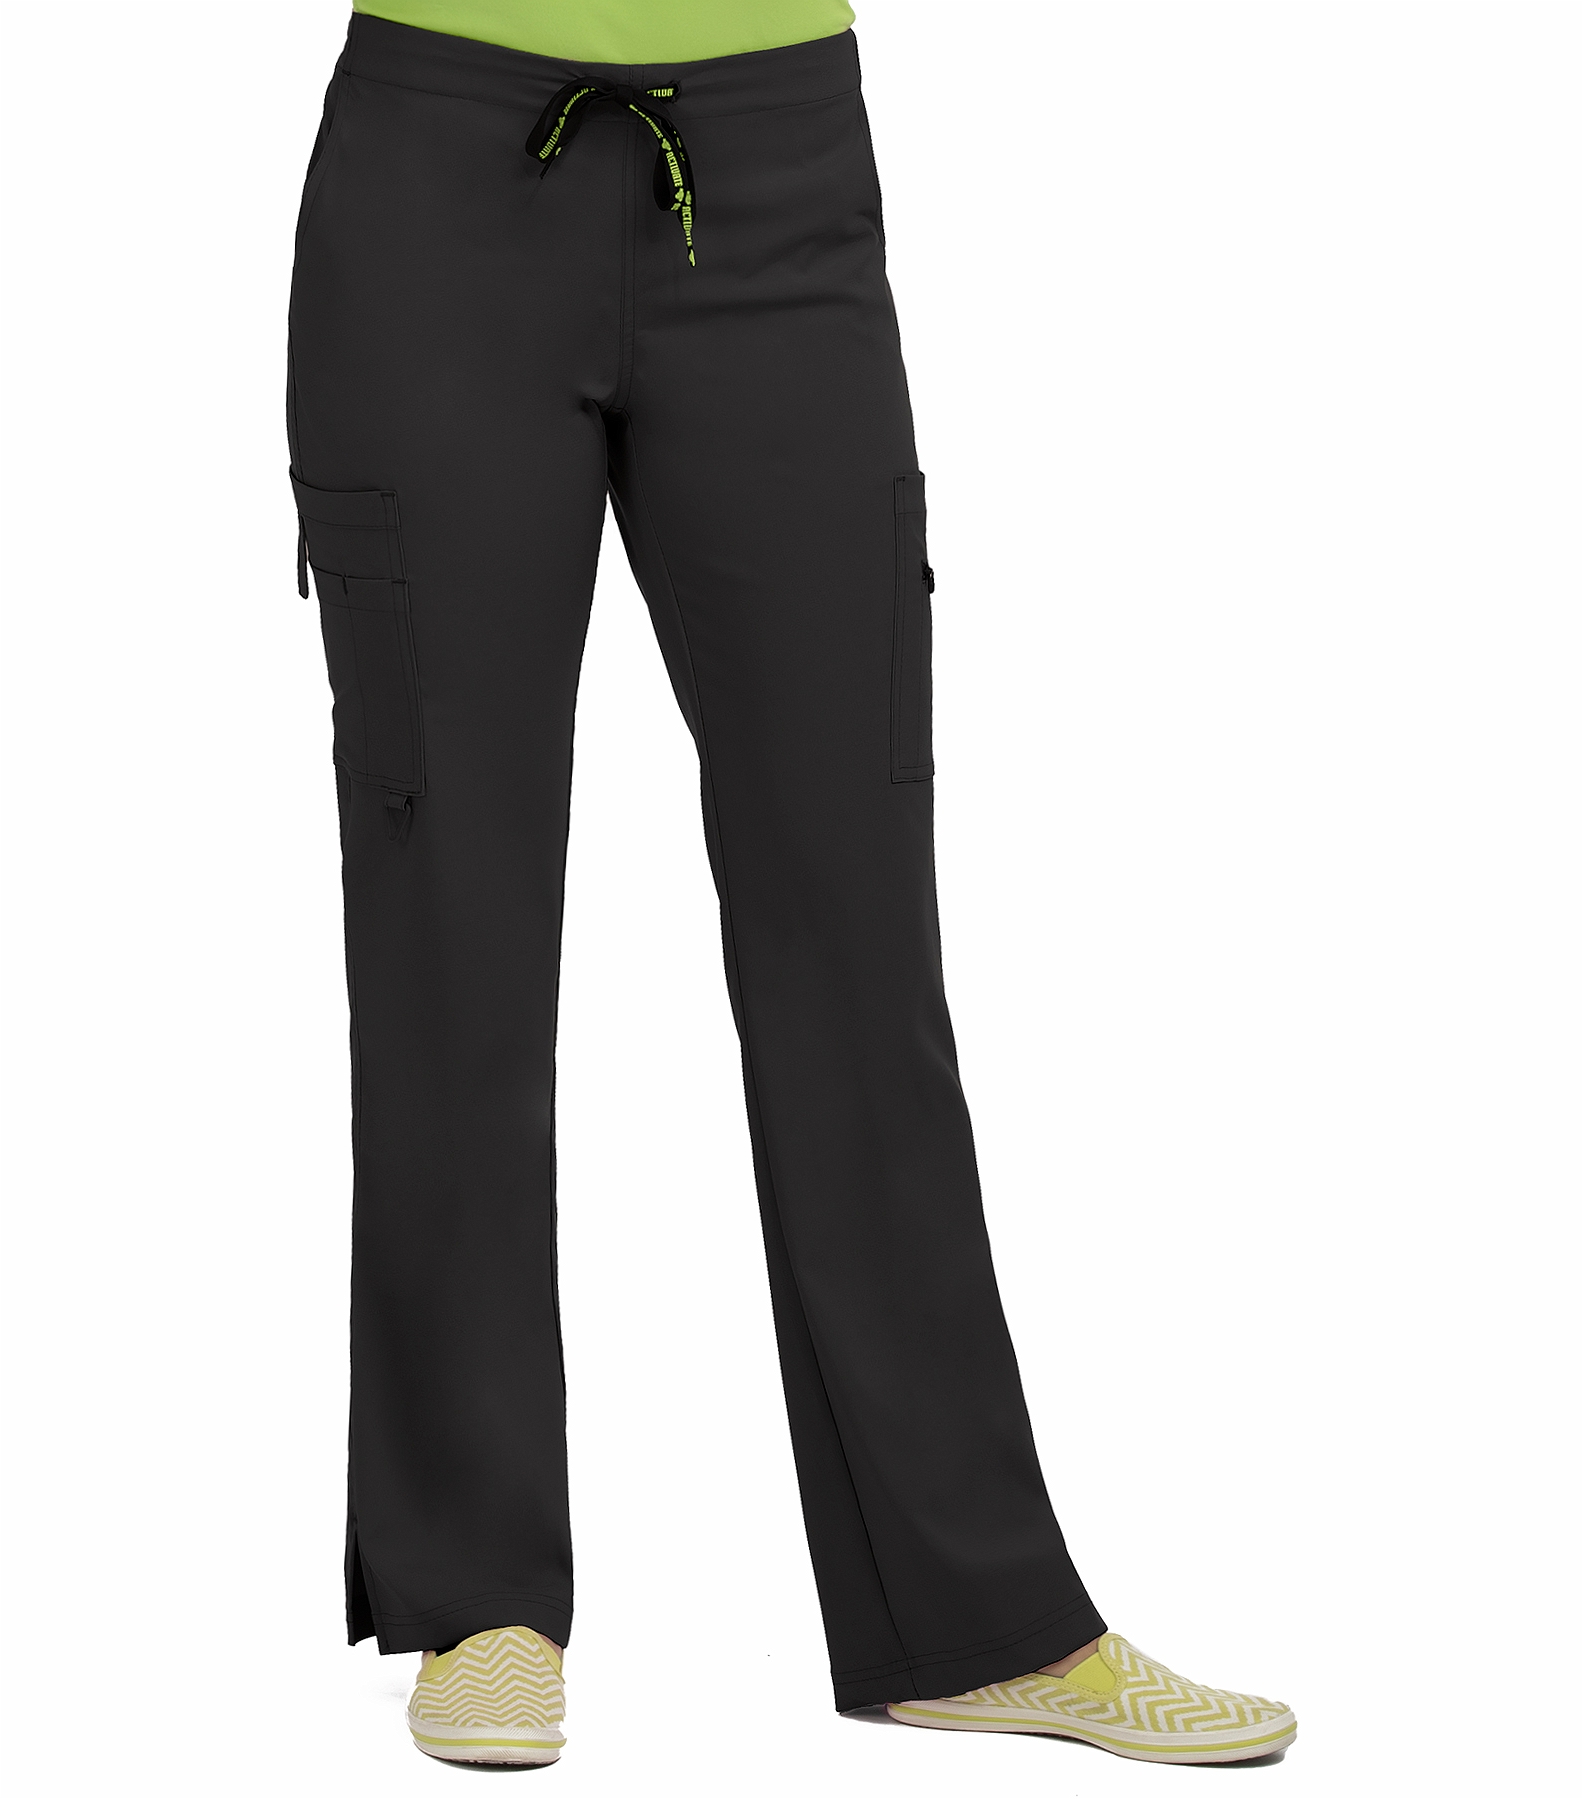 Med Couture Activate Hi-Definition Women's Cargo Scrub Pants-8743